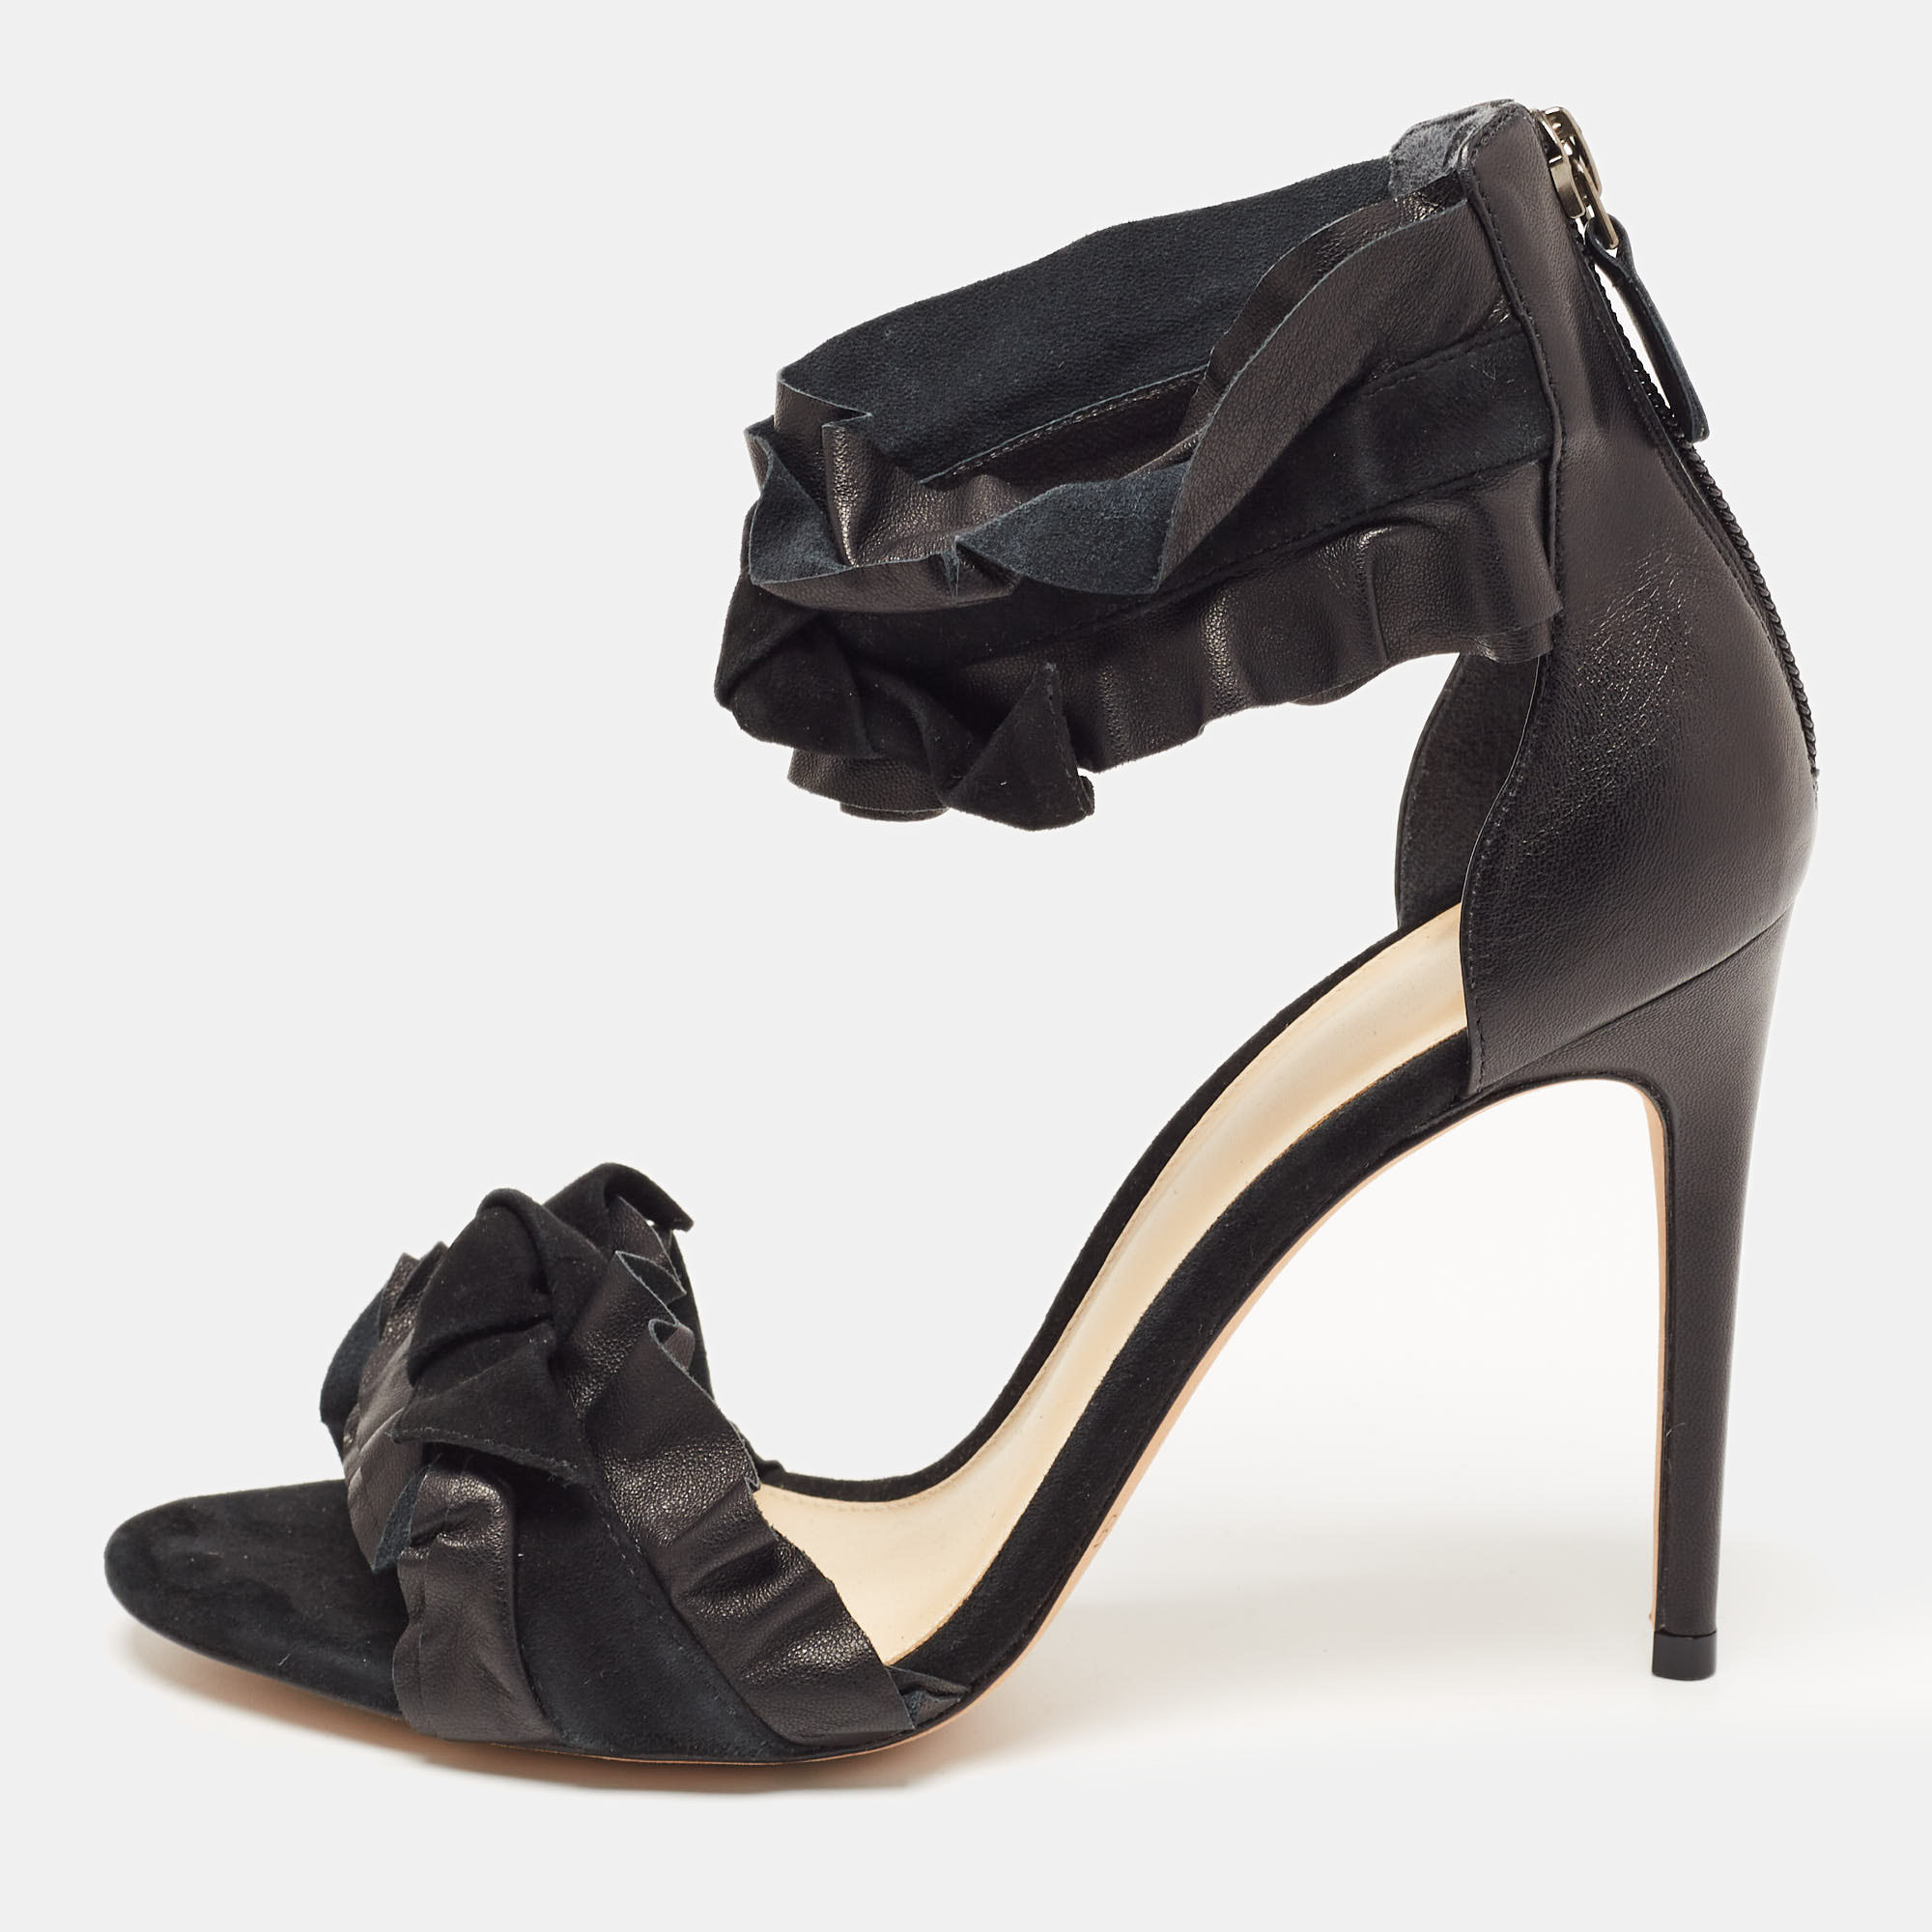 Alexandre Birman Black Leather And Suede Ruffle Ankle Wrap Sandals Size 38